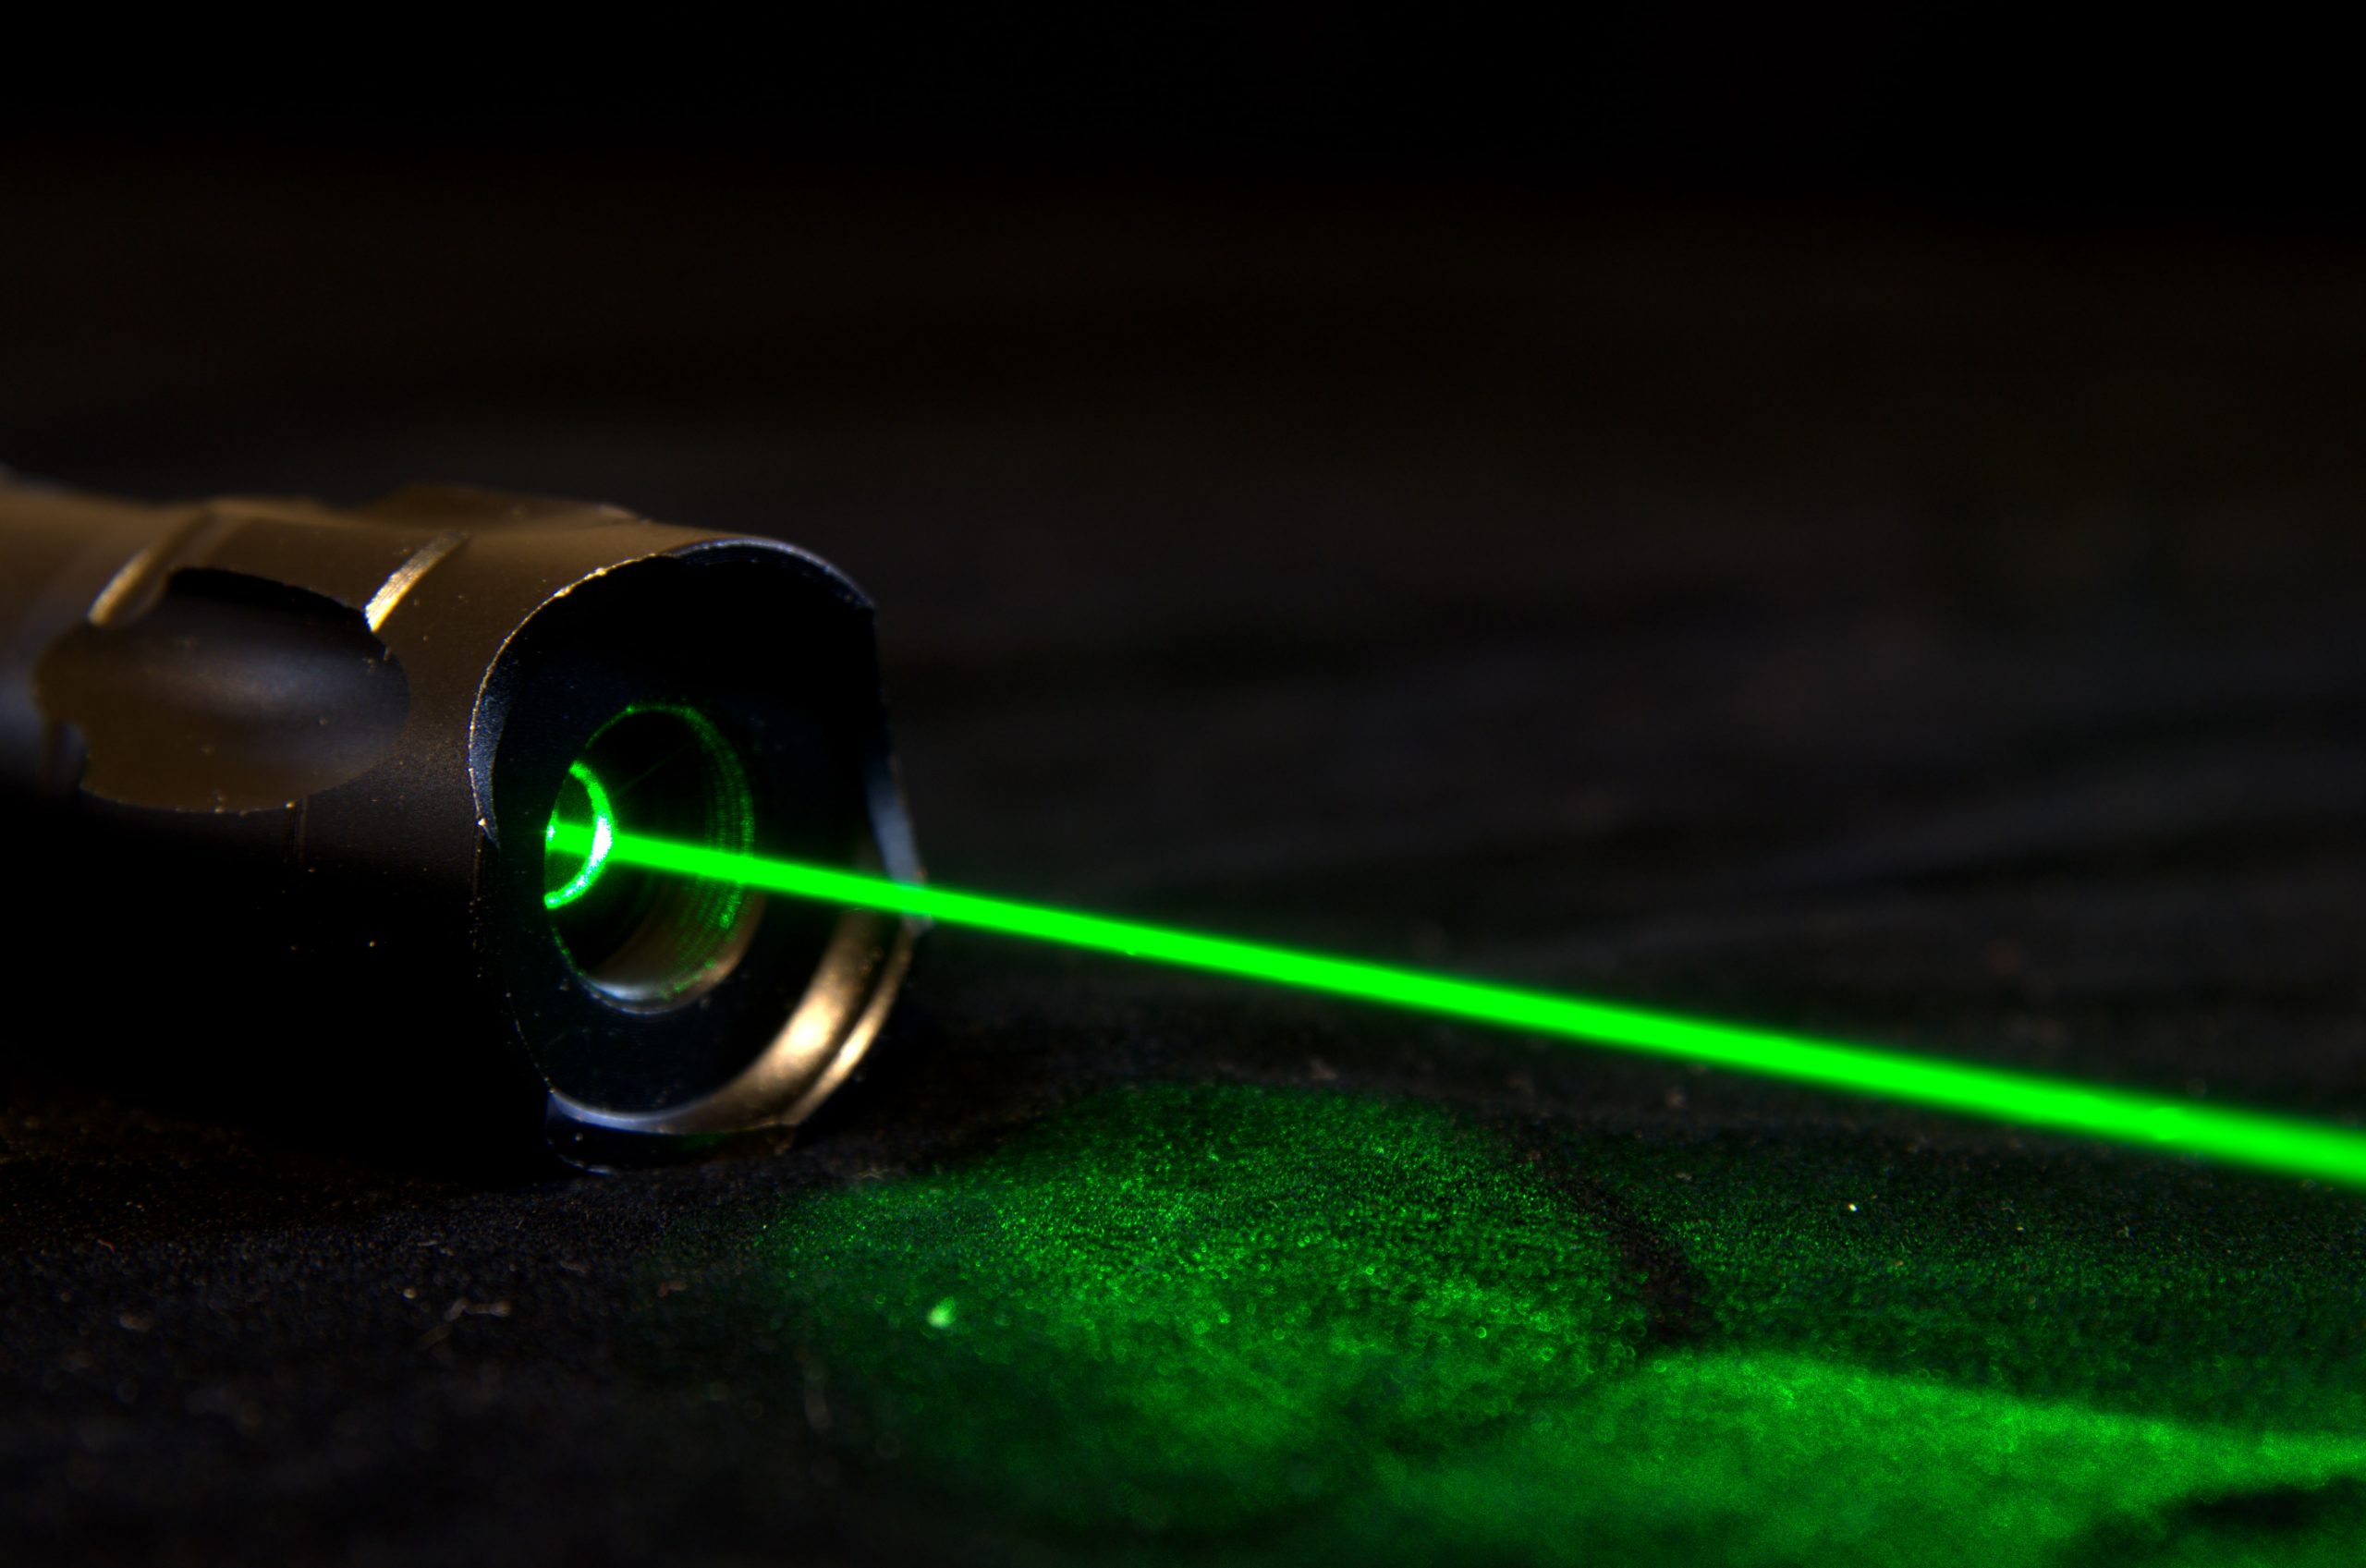 Laser Pointers Legal in NSW?